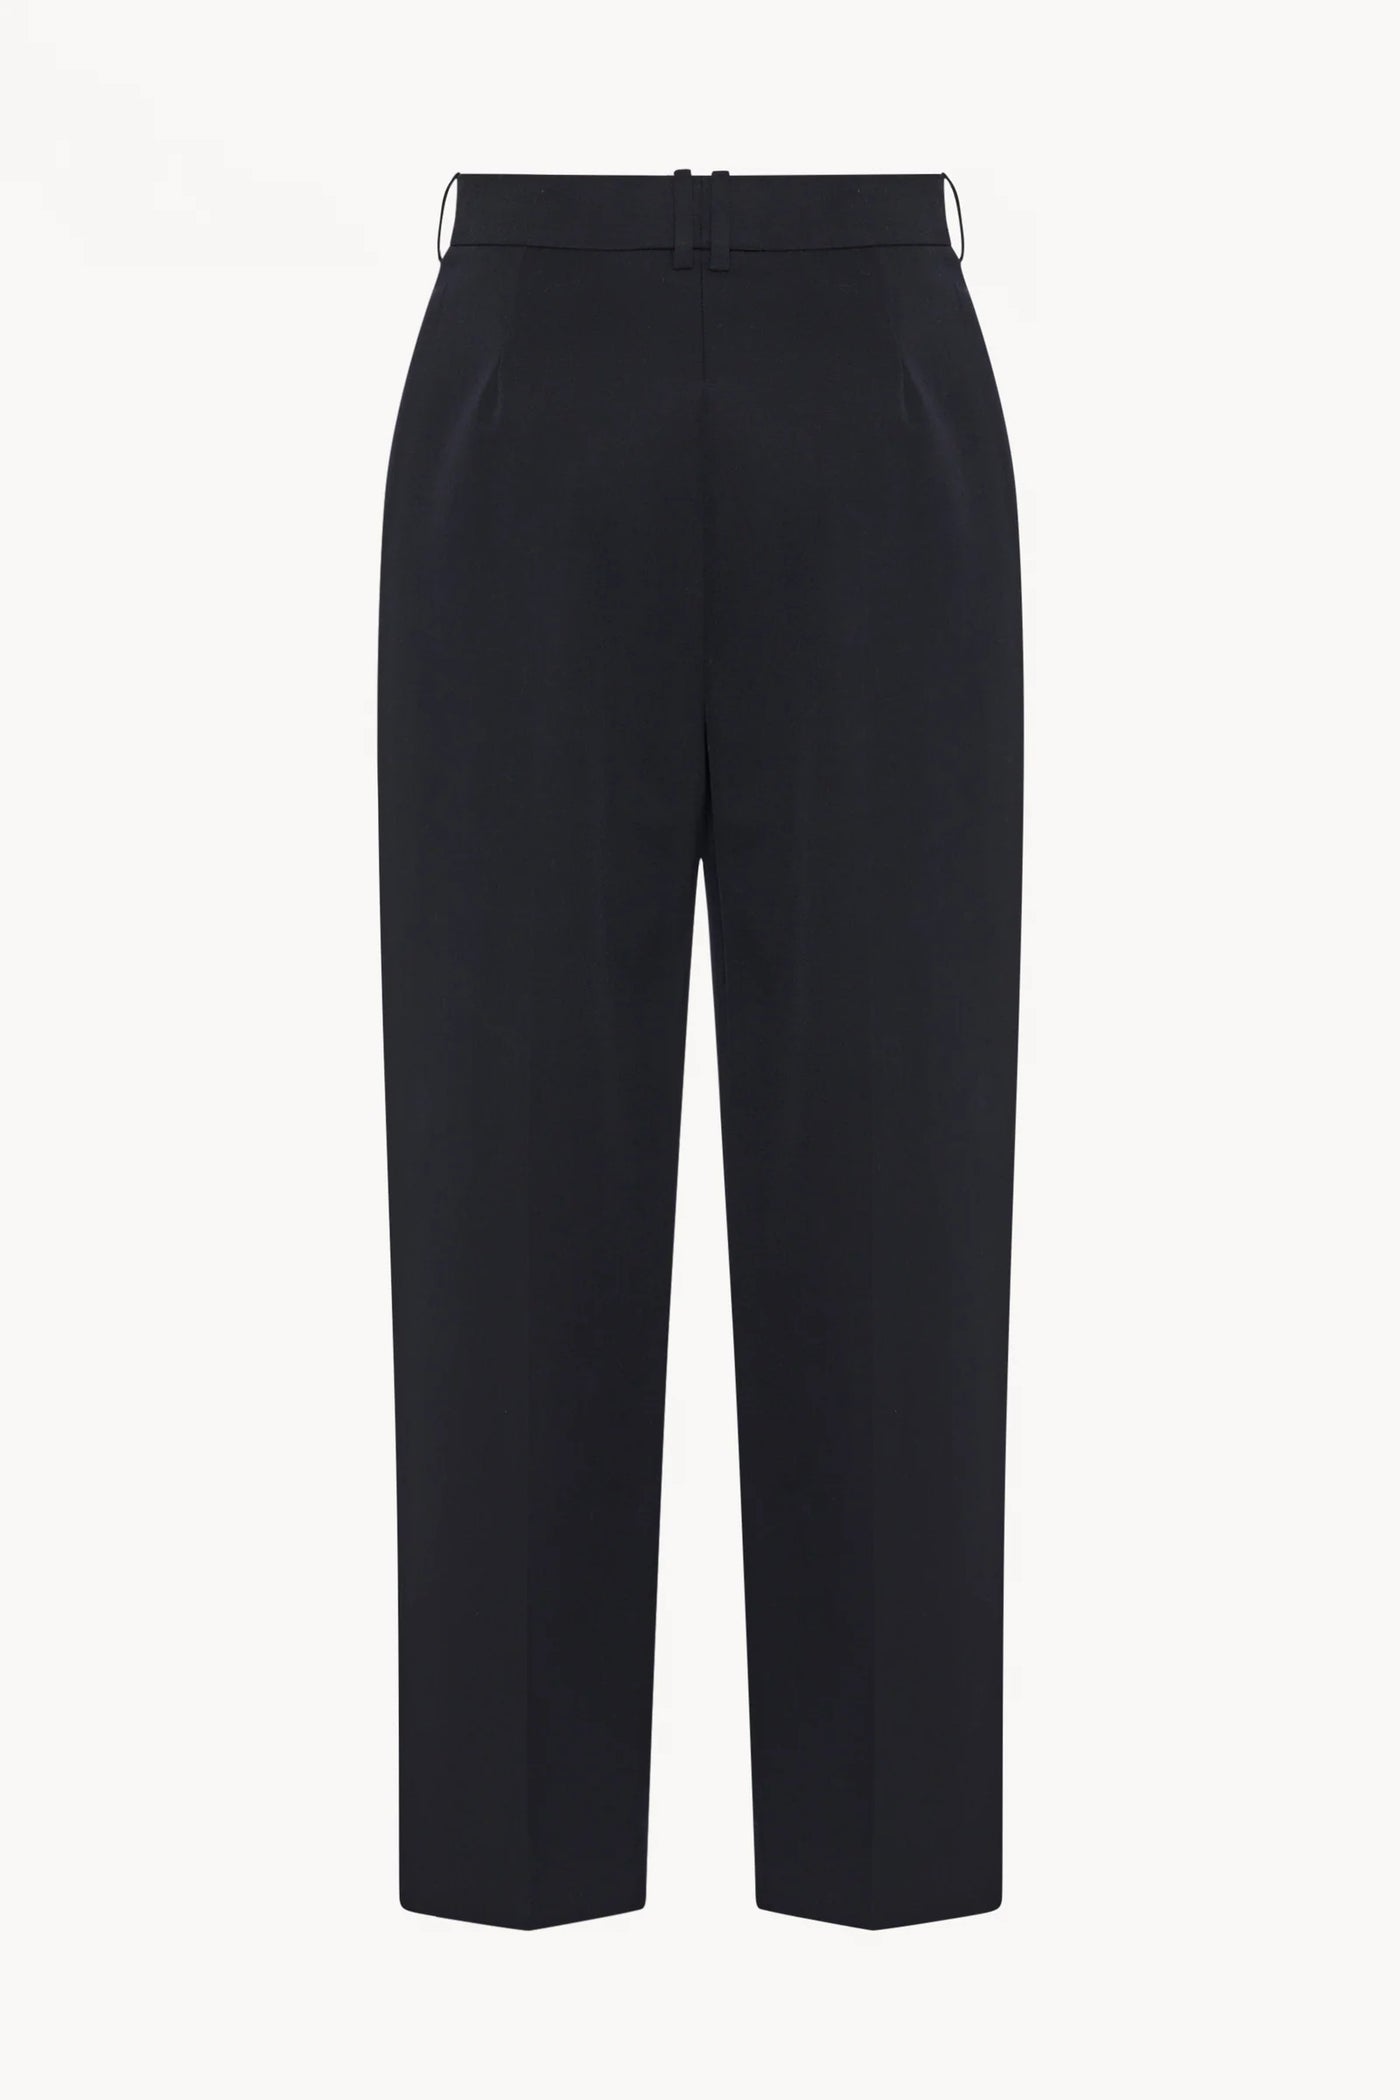 Corby Pant